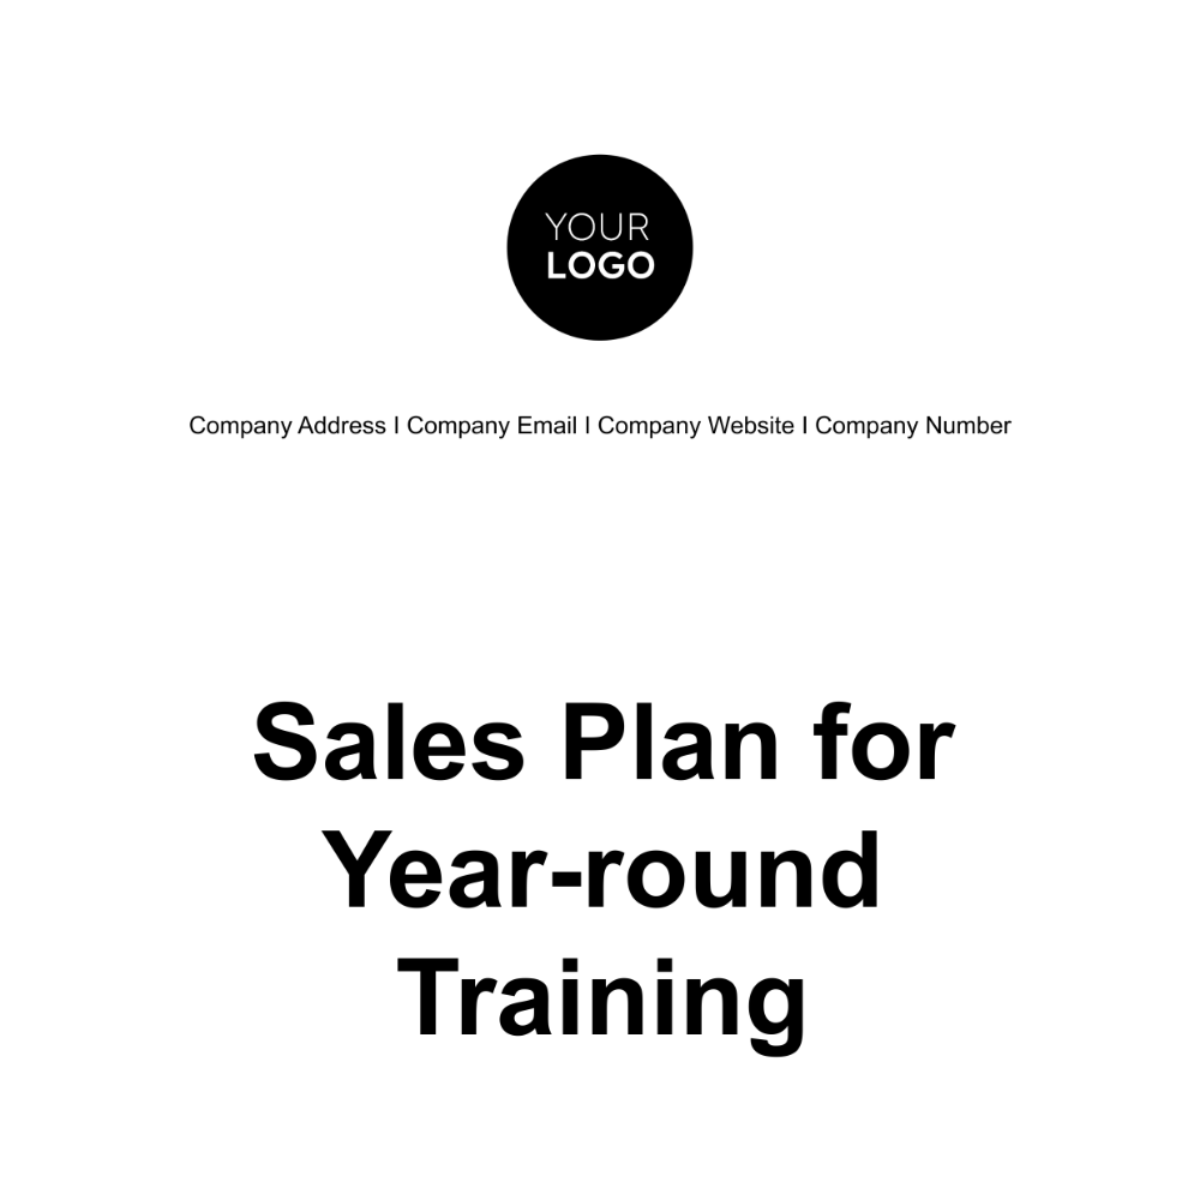 Sales Plan for Year-round Training Template